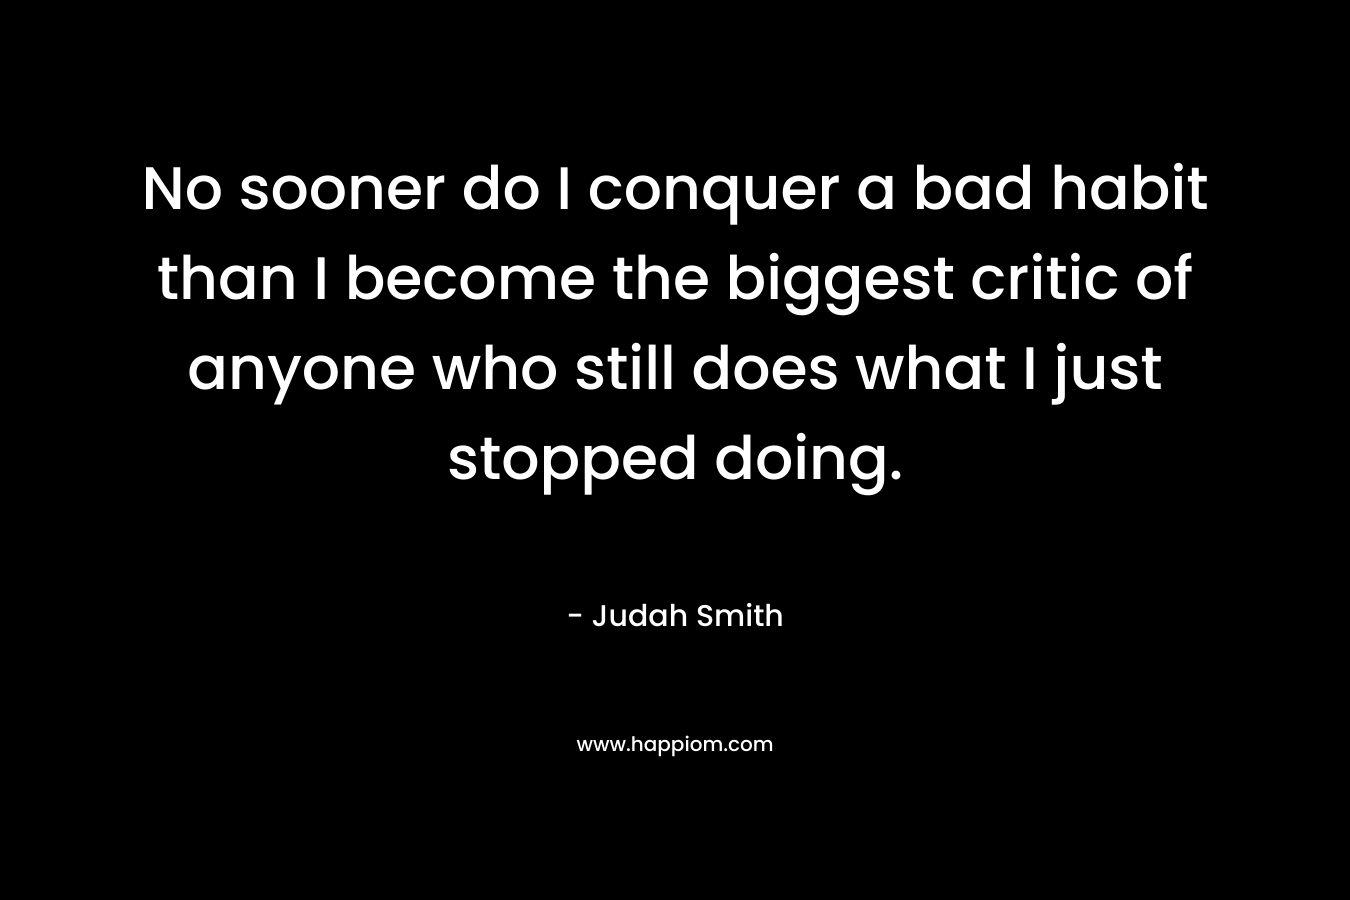 No sooner do I conquer a bad habit than I become the biggest critic of anyone who still does what I just stopped doing.